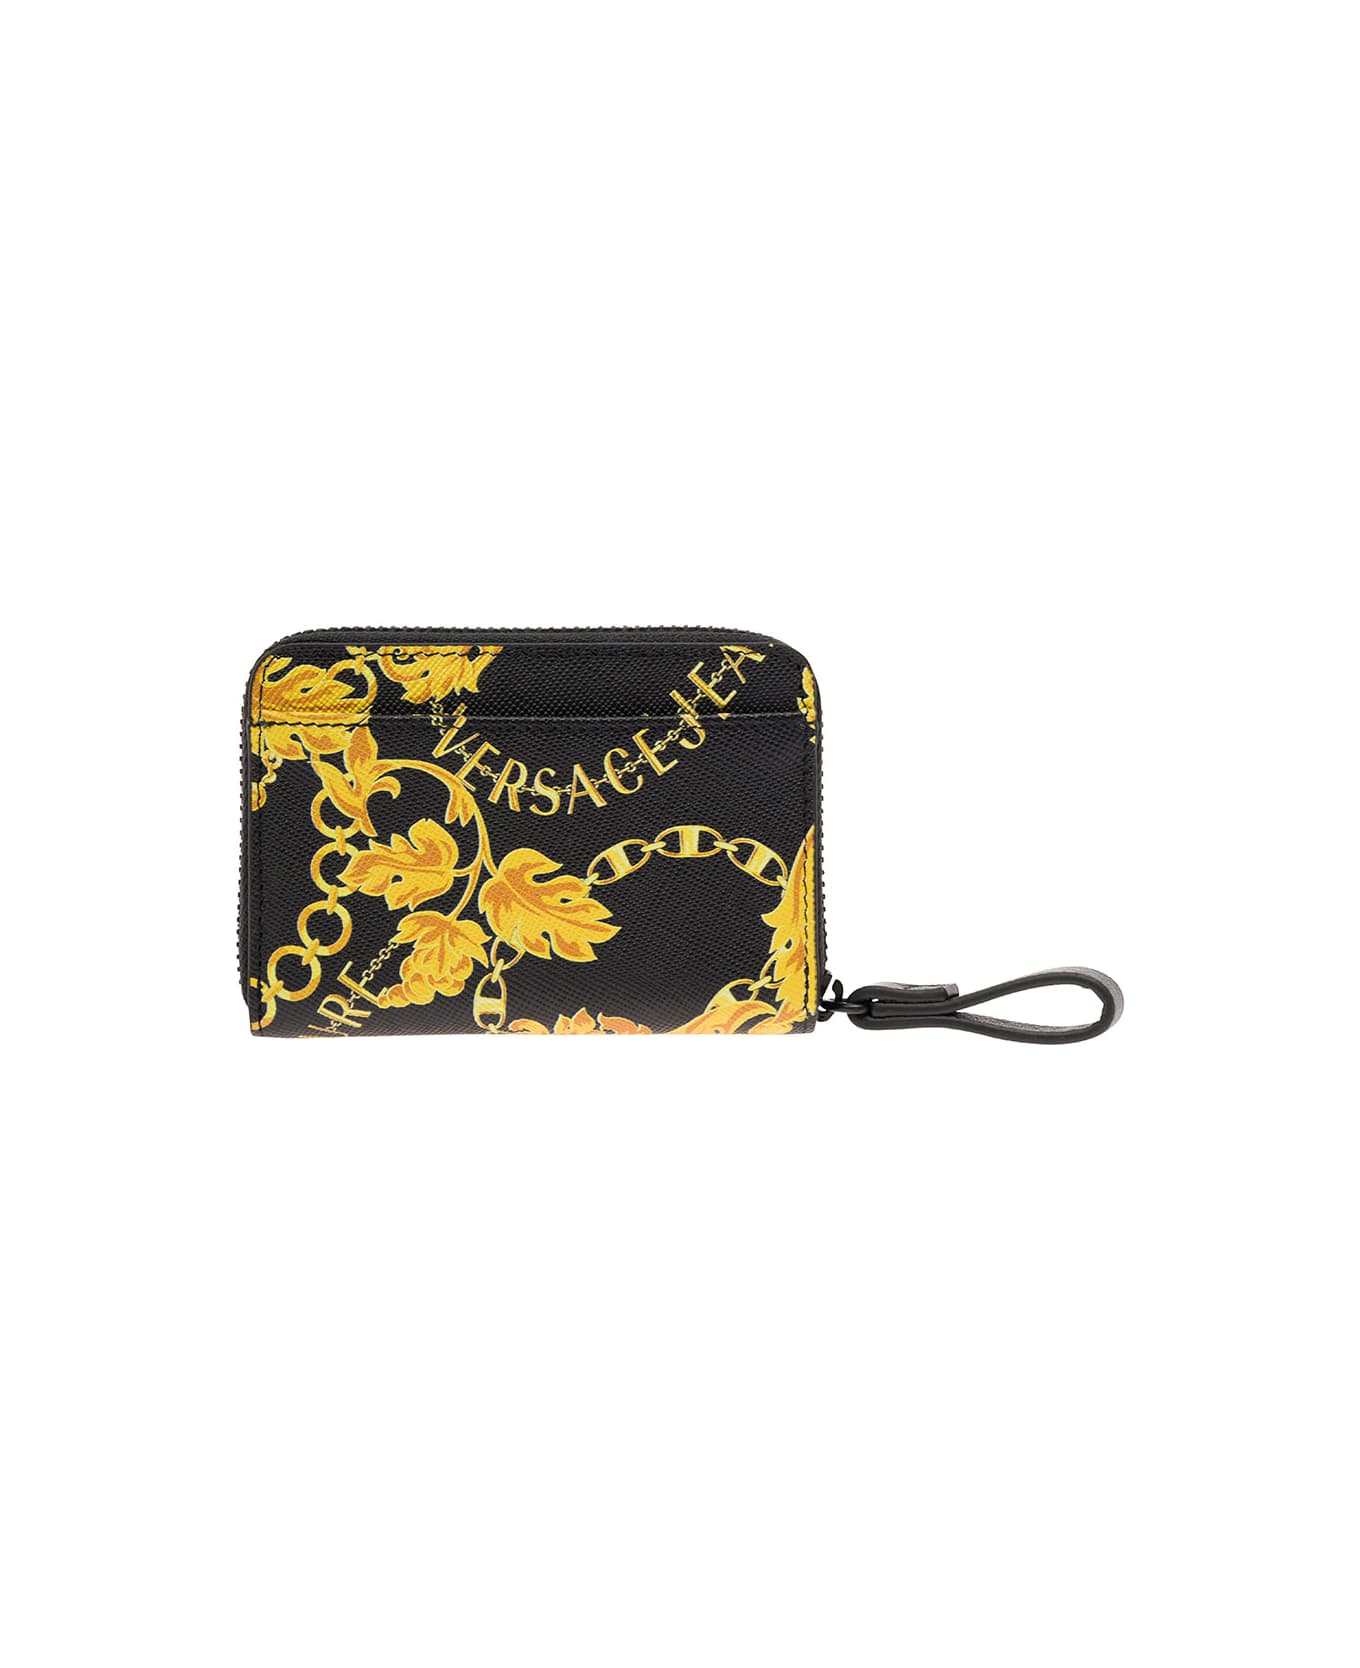 Versace Jeans Couture Black Zip-around Wallet With Barocco Print In Leather Man - Black 財布